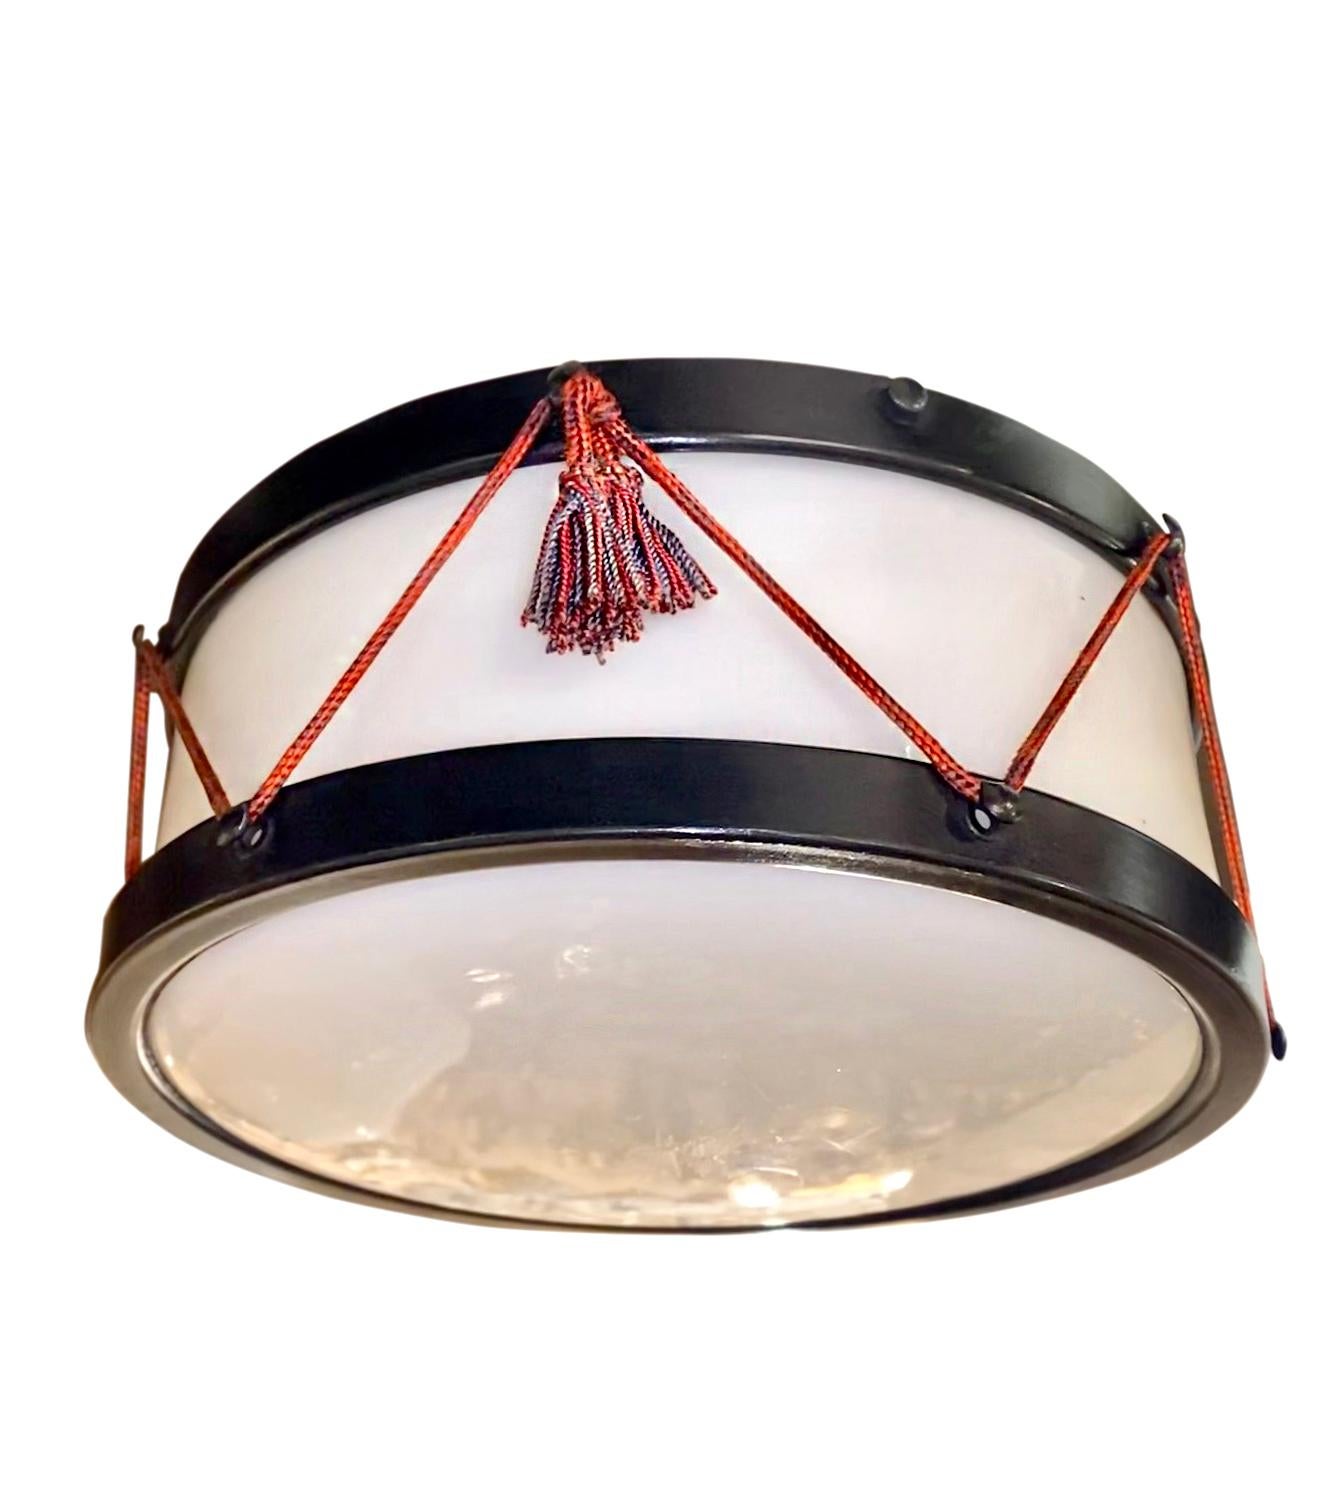 A circa 1940s French painted tole drum-shaped light fixture with milk glass inset.

Measurements:
Diameter: 12